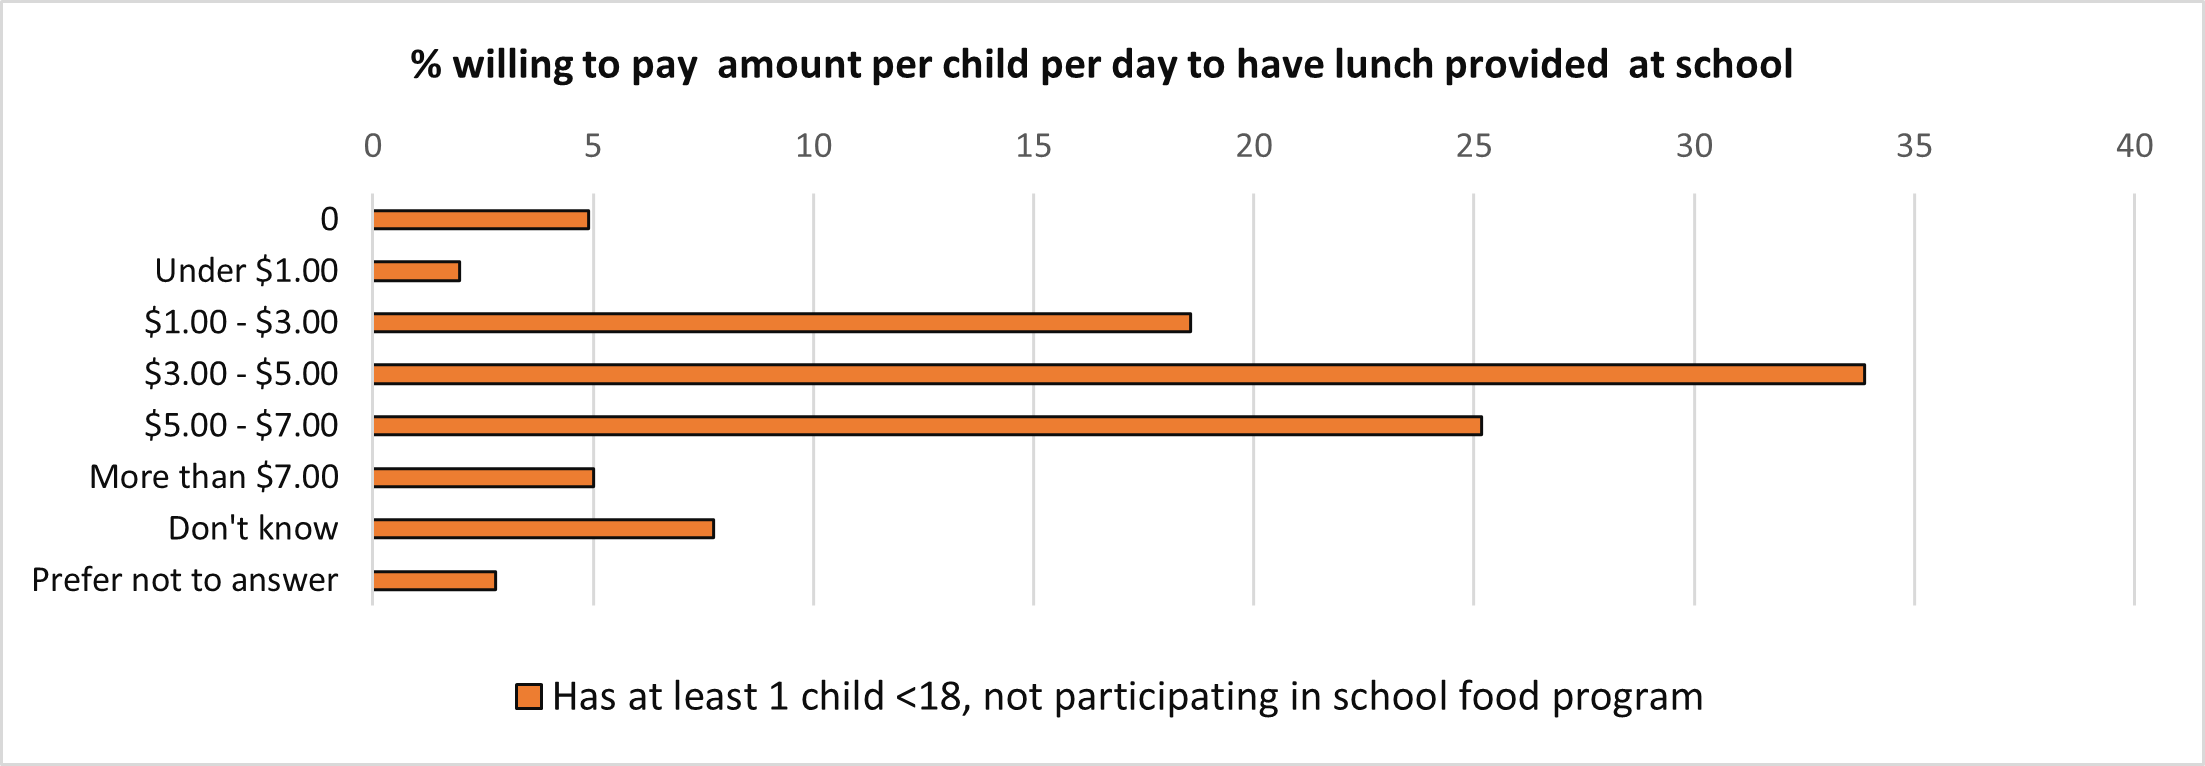 A bar chart of the percent willing to pay amount per child per day to have lunch provided at school. Text version below.